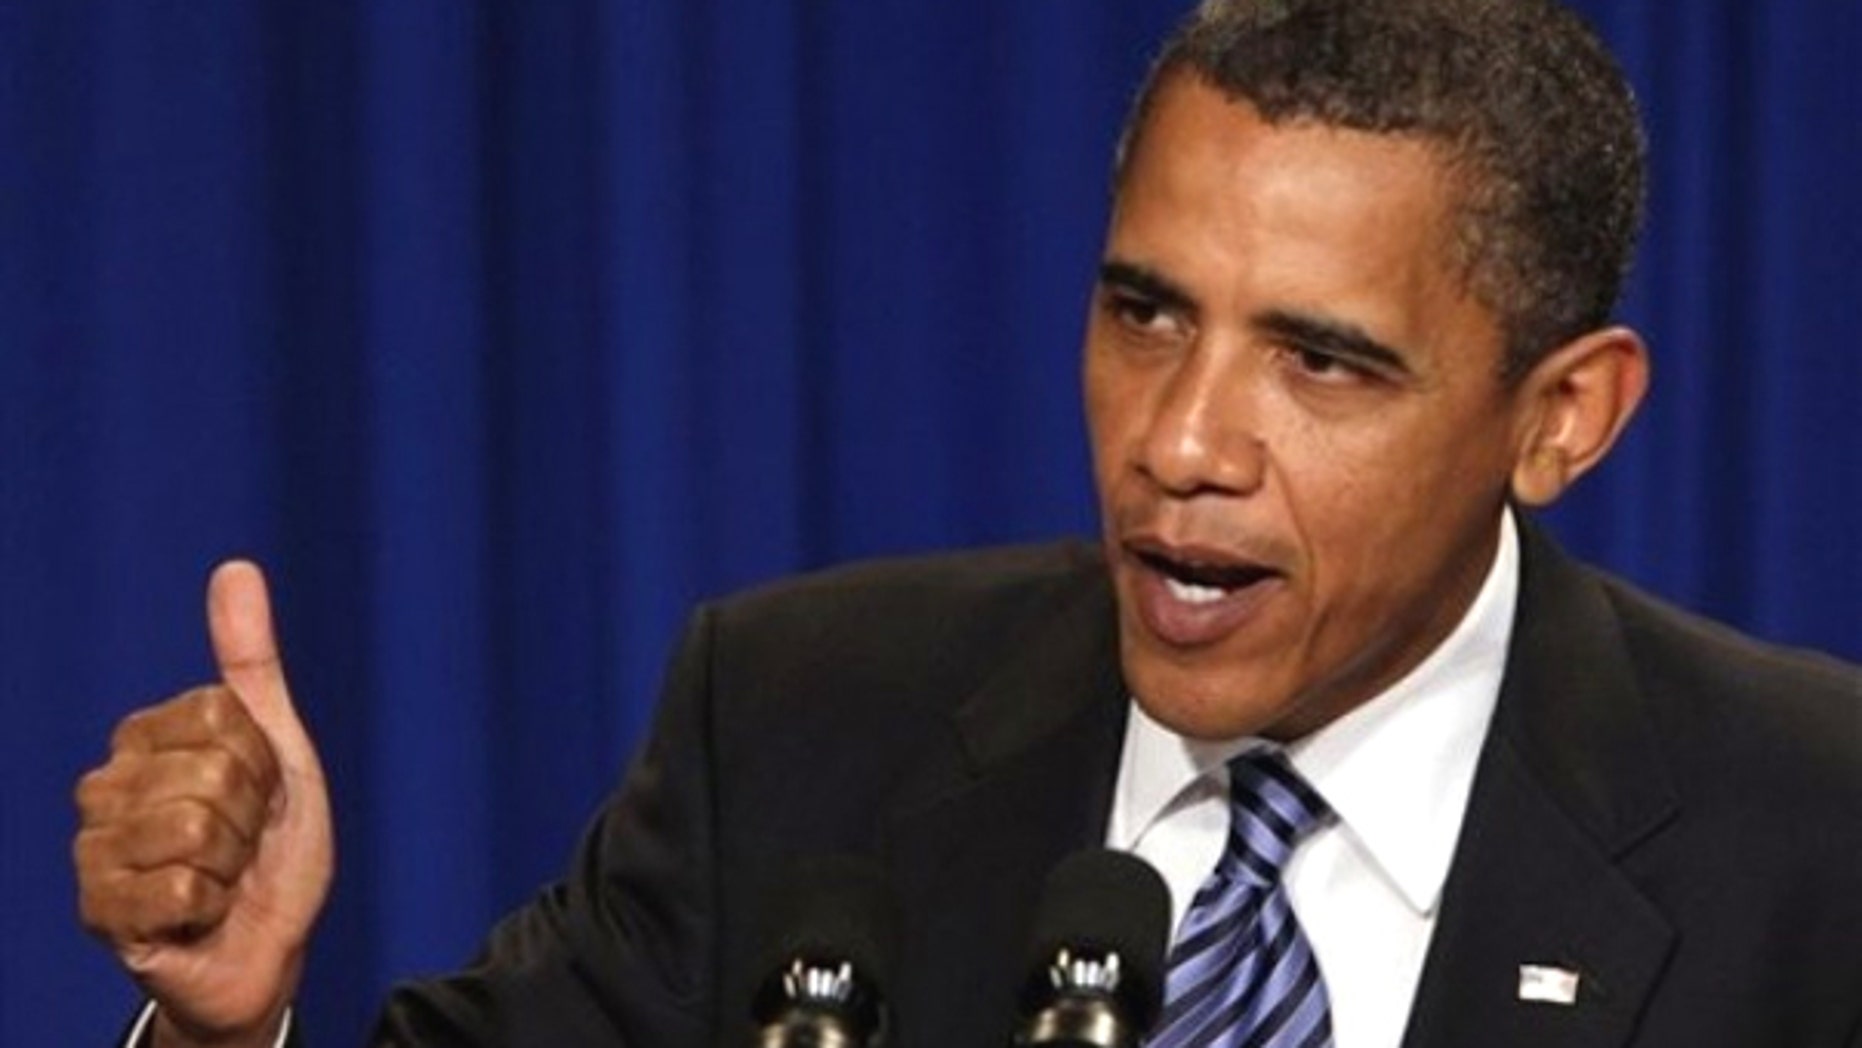 Nearly 1 In 5 Americans Thinks Obama Is Muslim Survey Shows Fox News